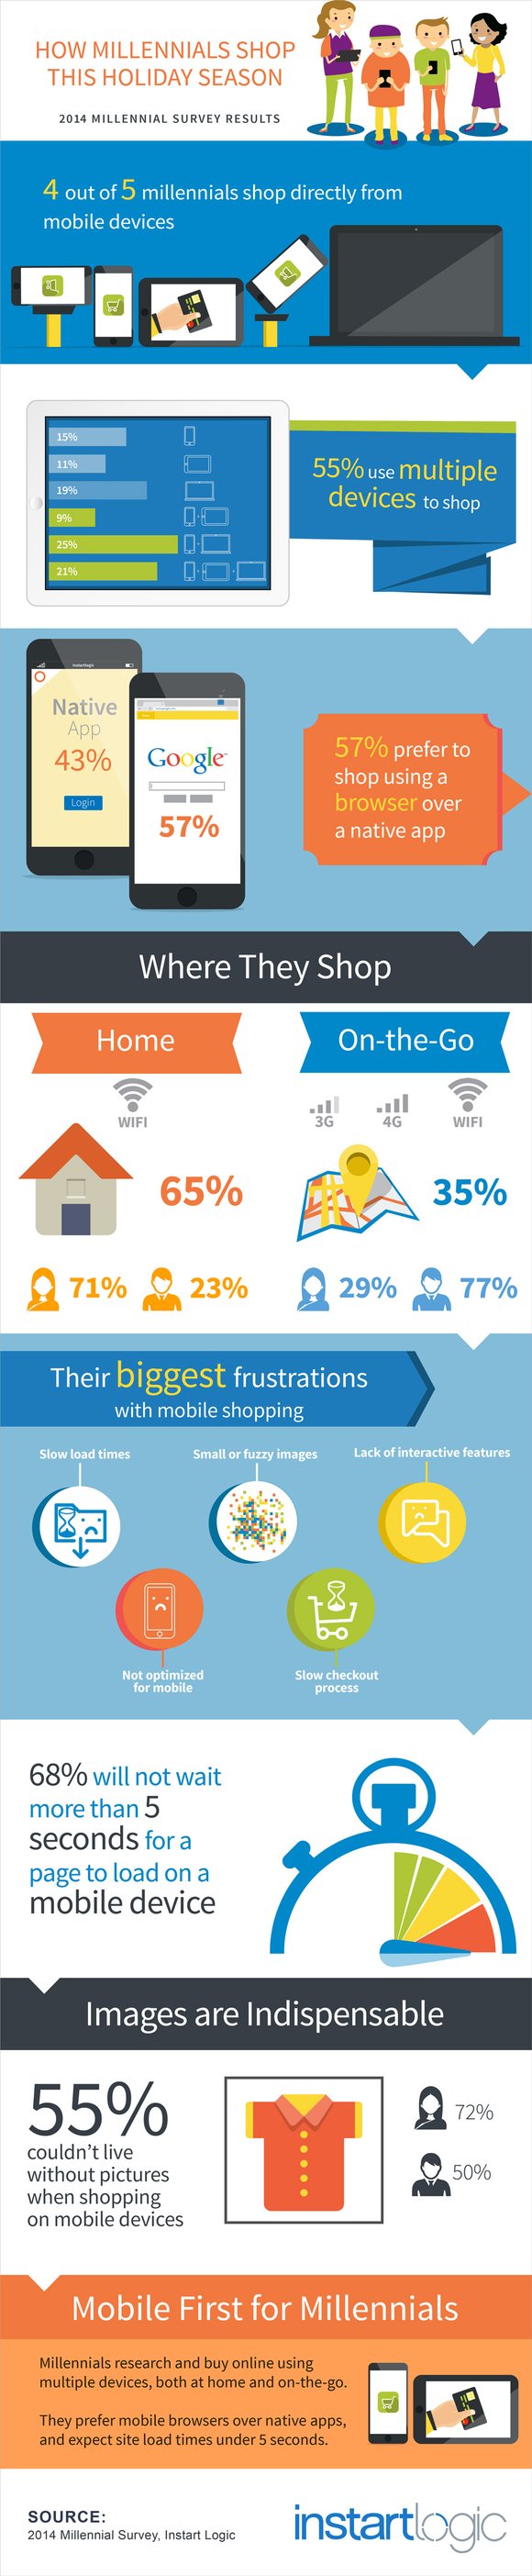 How Millennials Will Shop This Holiday Season (Infographic)